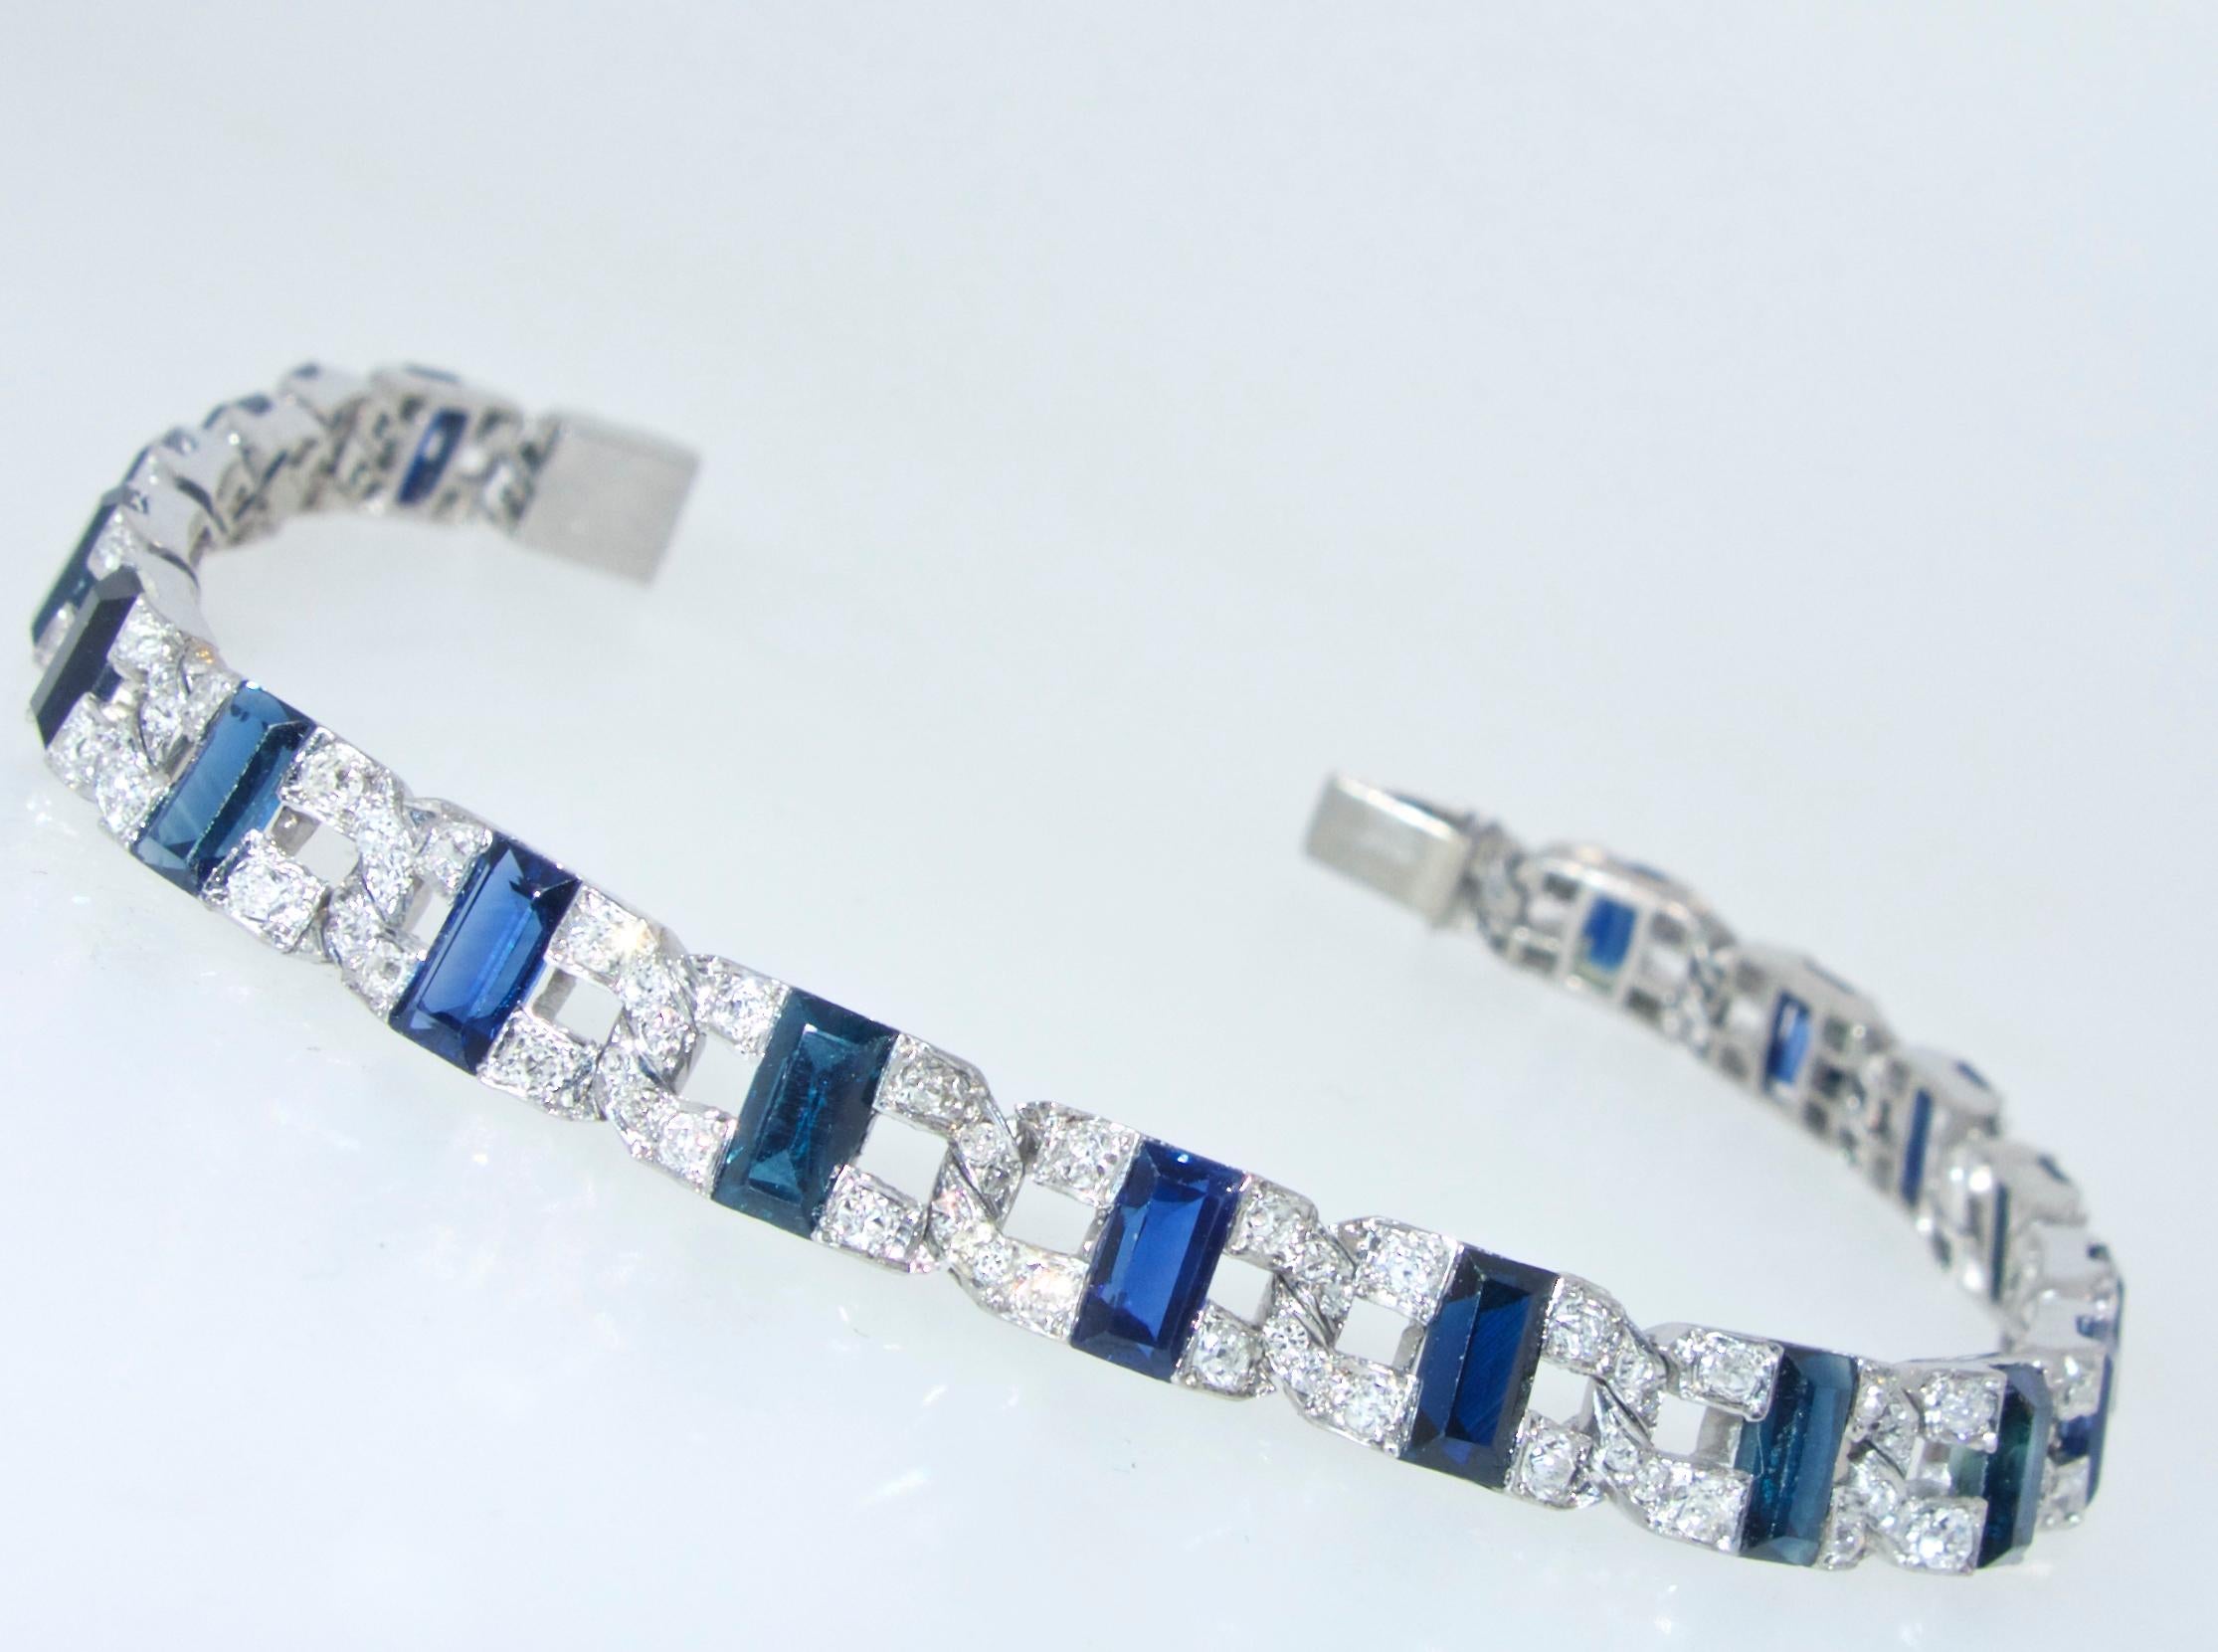 Vintage Fine sapphires and diamonds create a geometric pattern around the wrist.  The 20 fine blue natural sapphires weigh approximately 6 cts., the 150 white round diamonds weigh approximately 1.50 cts.  This platinum bracelet weighs 19.4 grams and